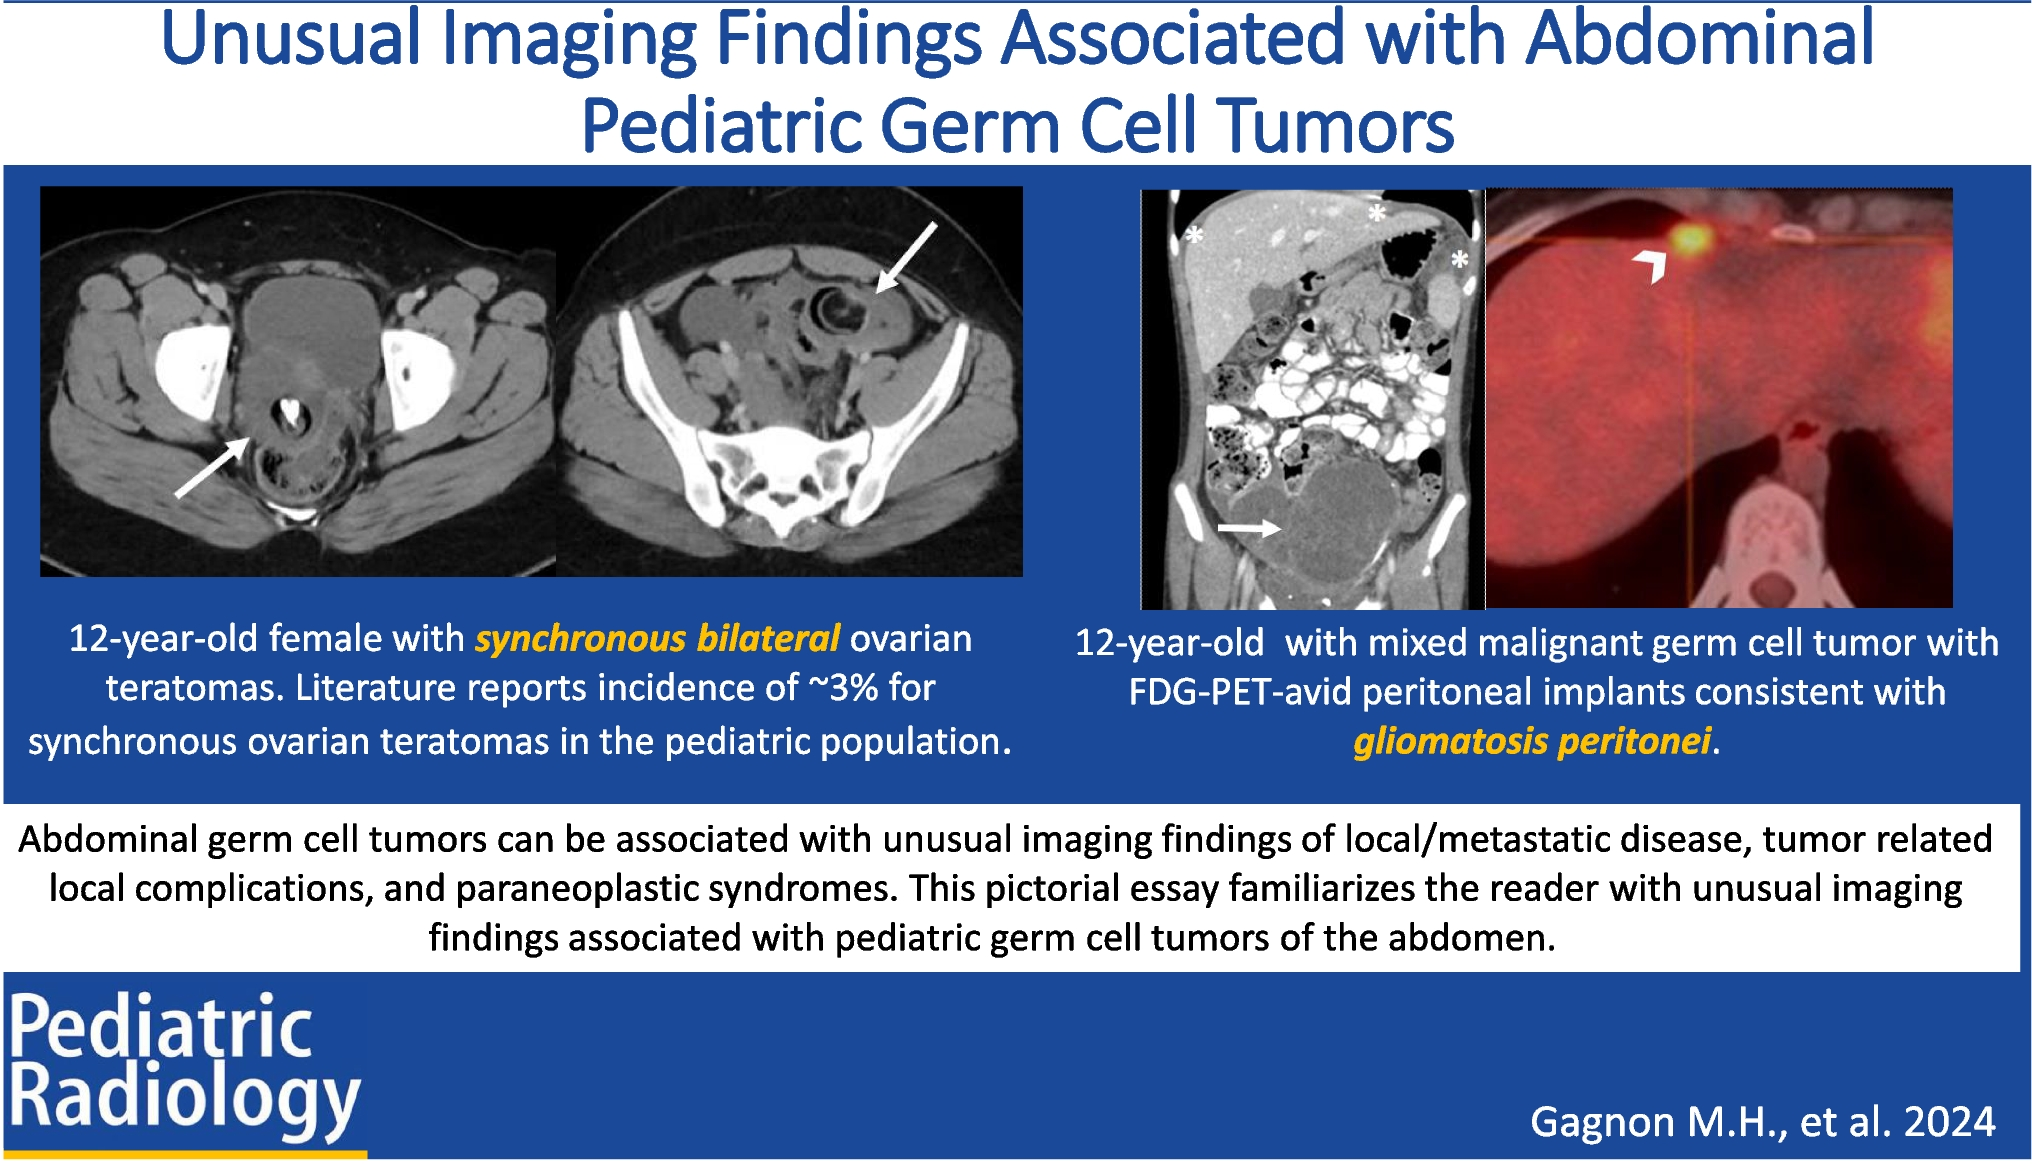 Unusual imaging findings associated with abdominal pediatric germ cell tumors